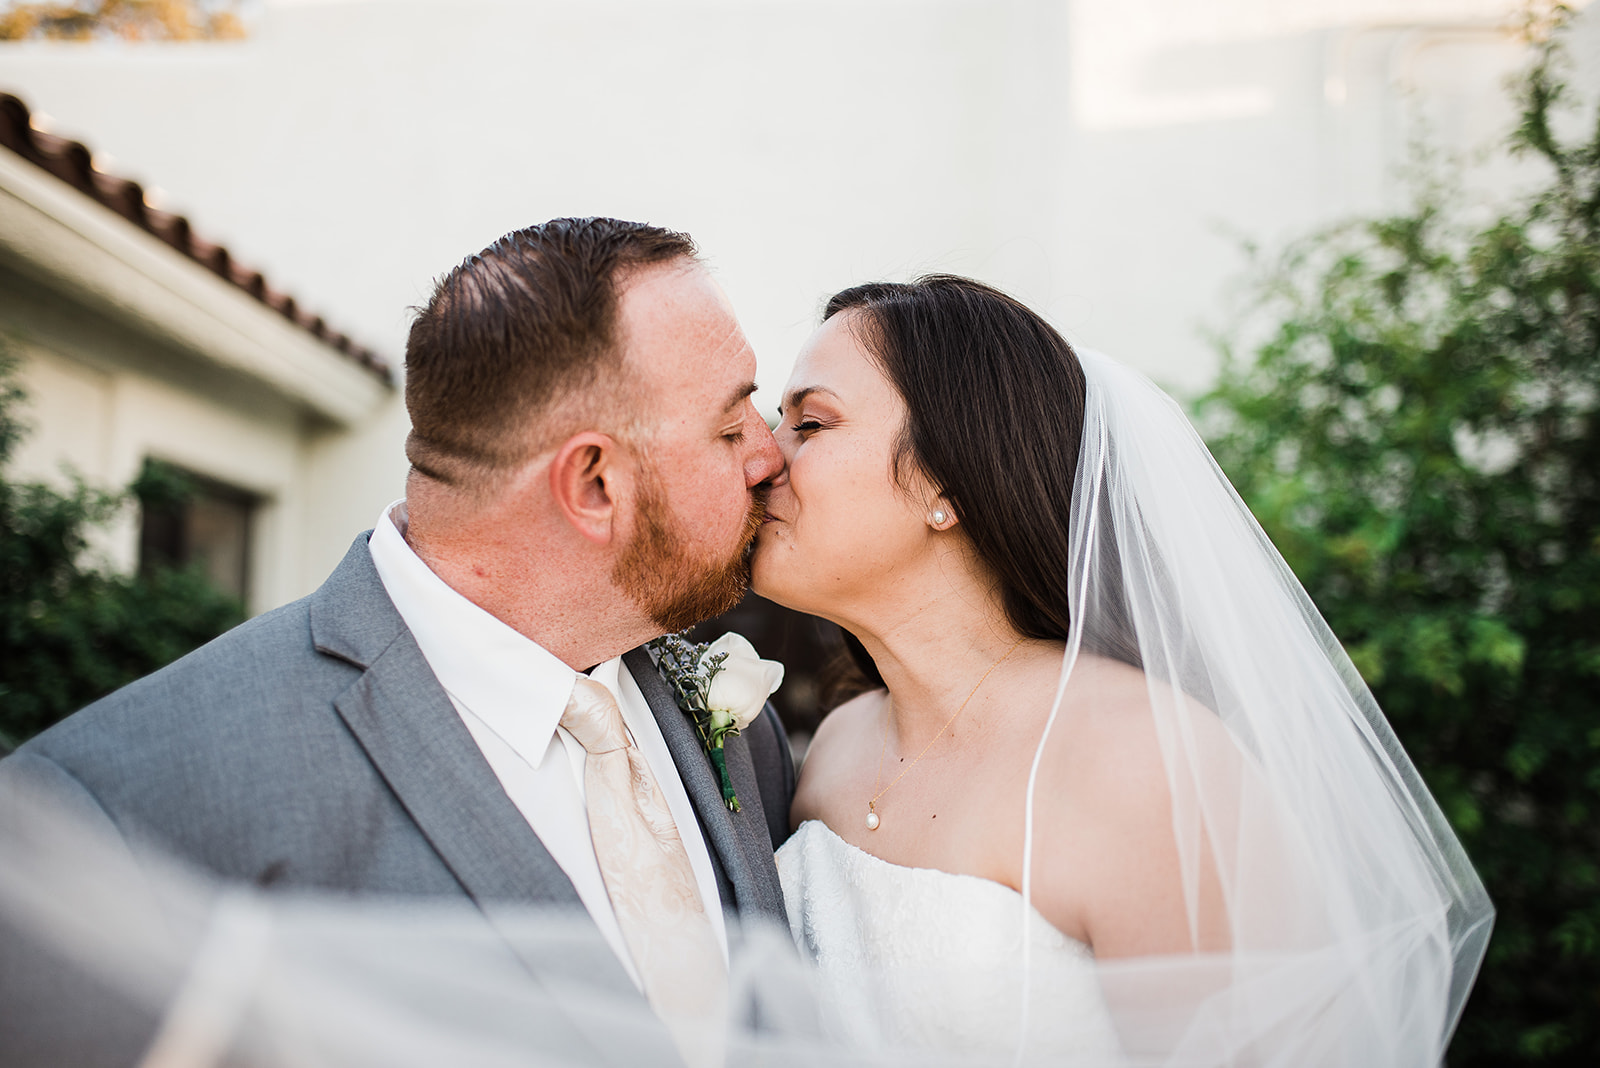 Newlyweds kiss in a garden with the veil flowing around them